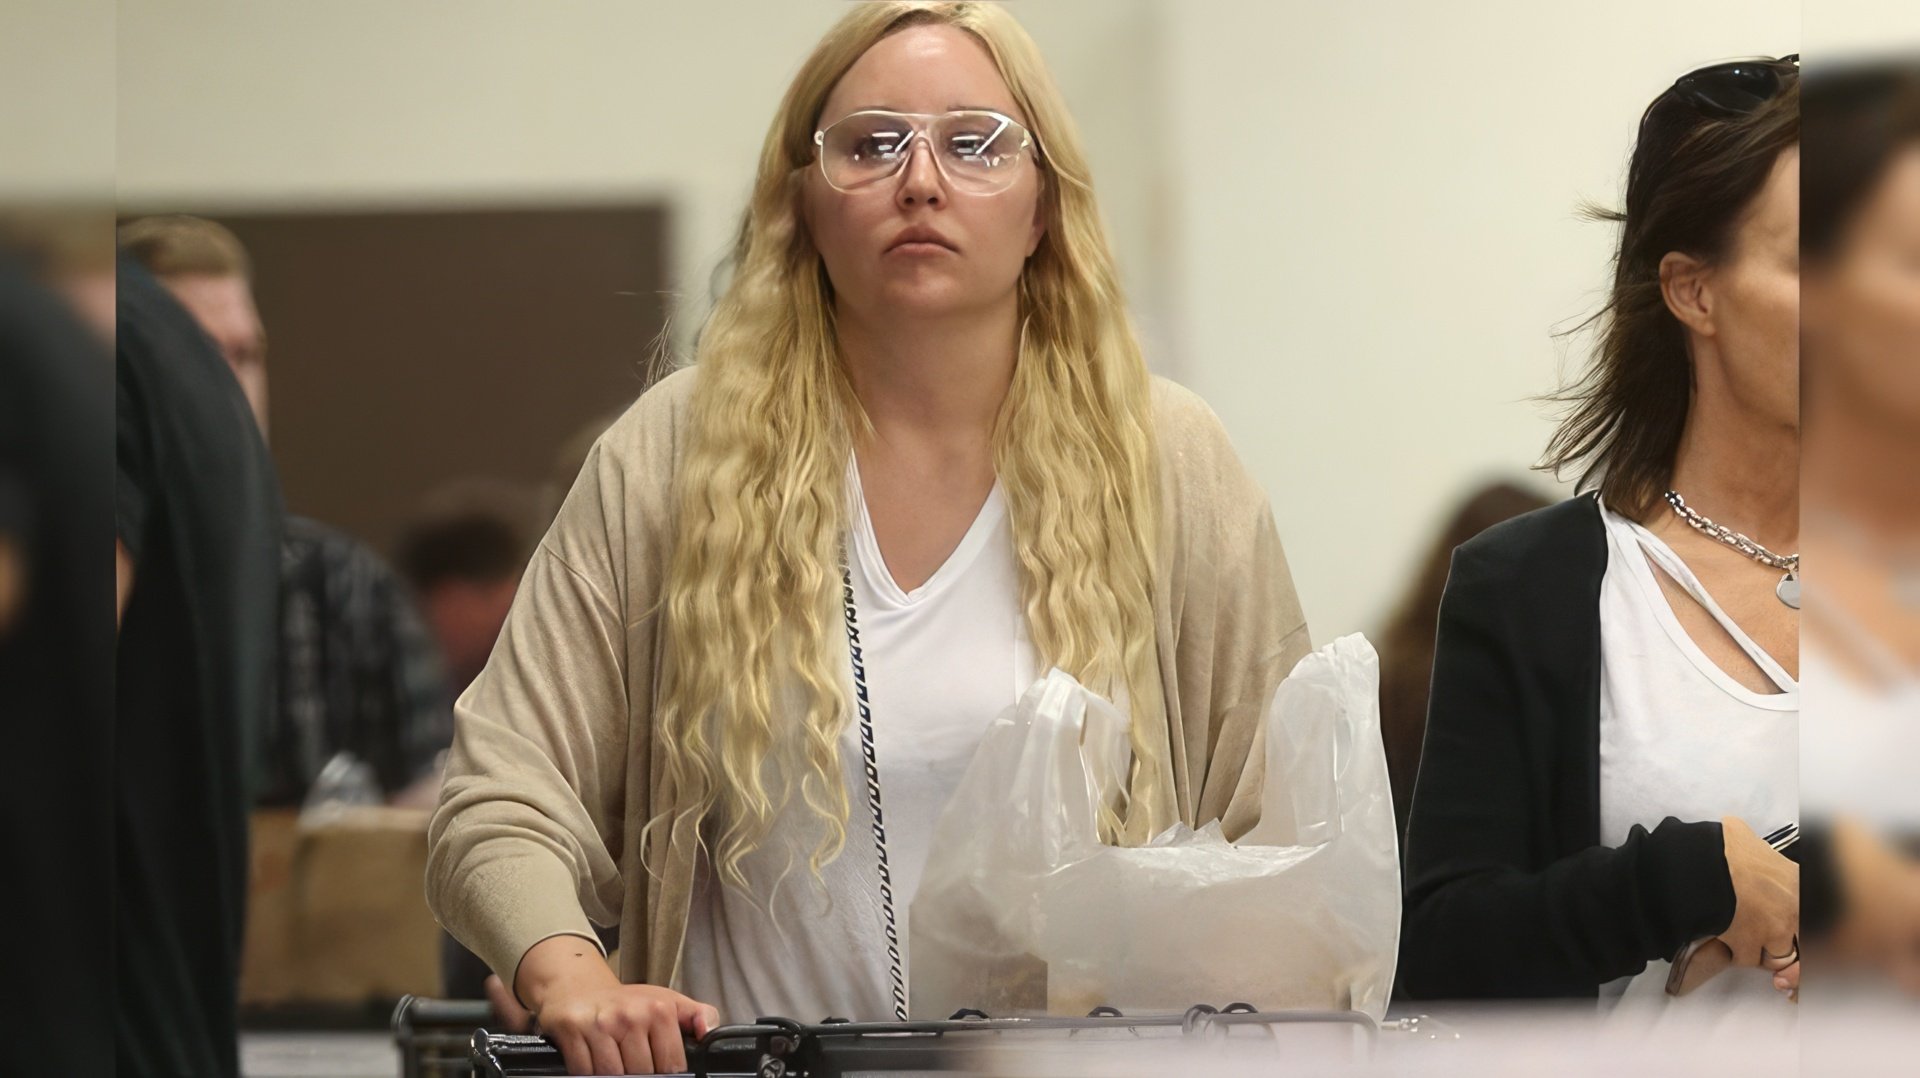 After treatment, Amanda Bynes gained weight